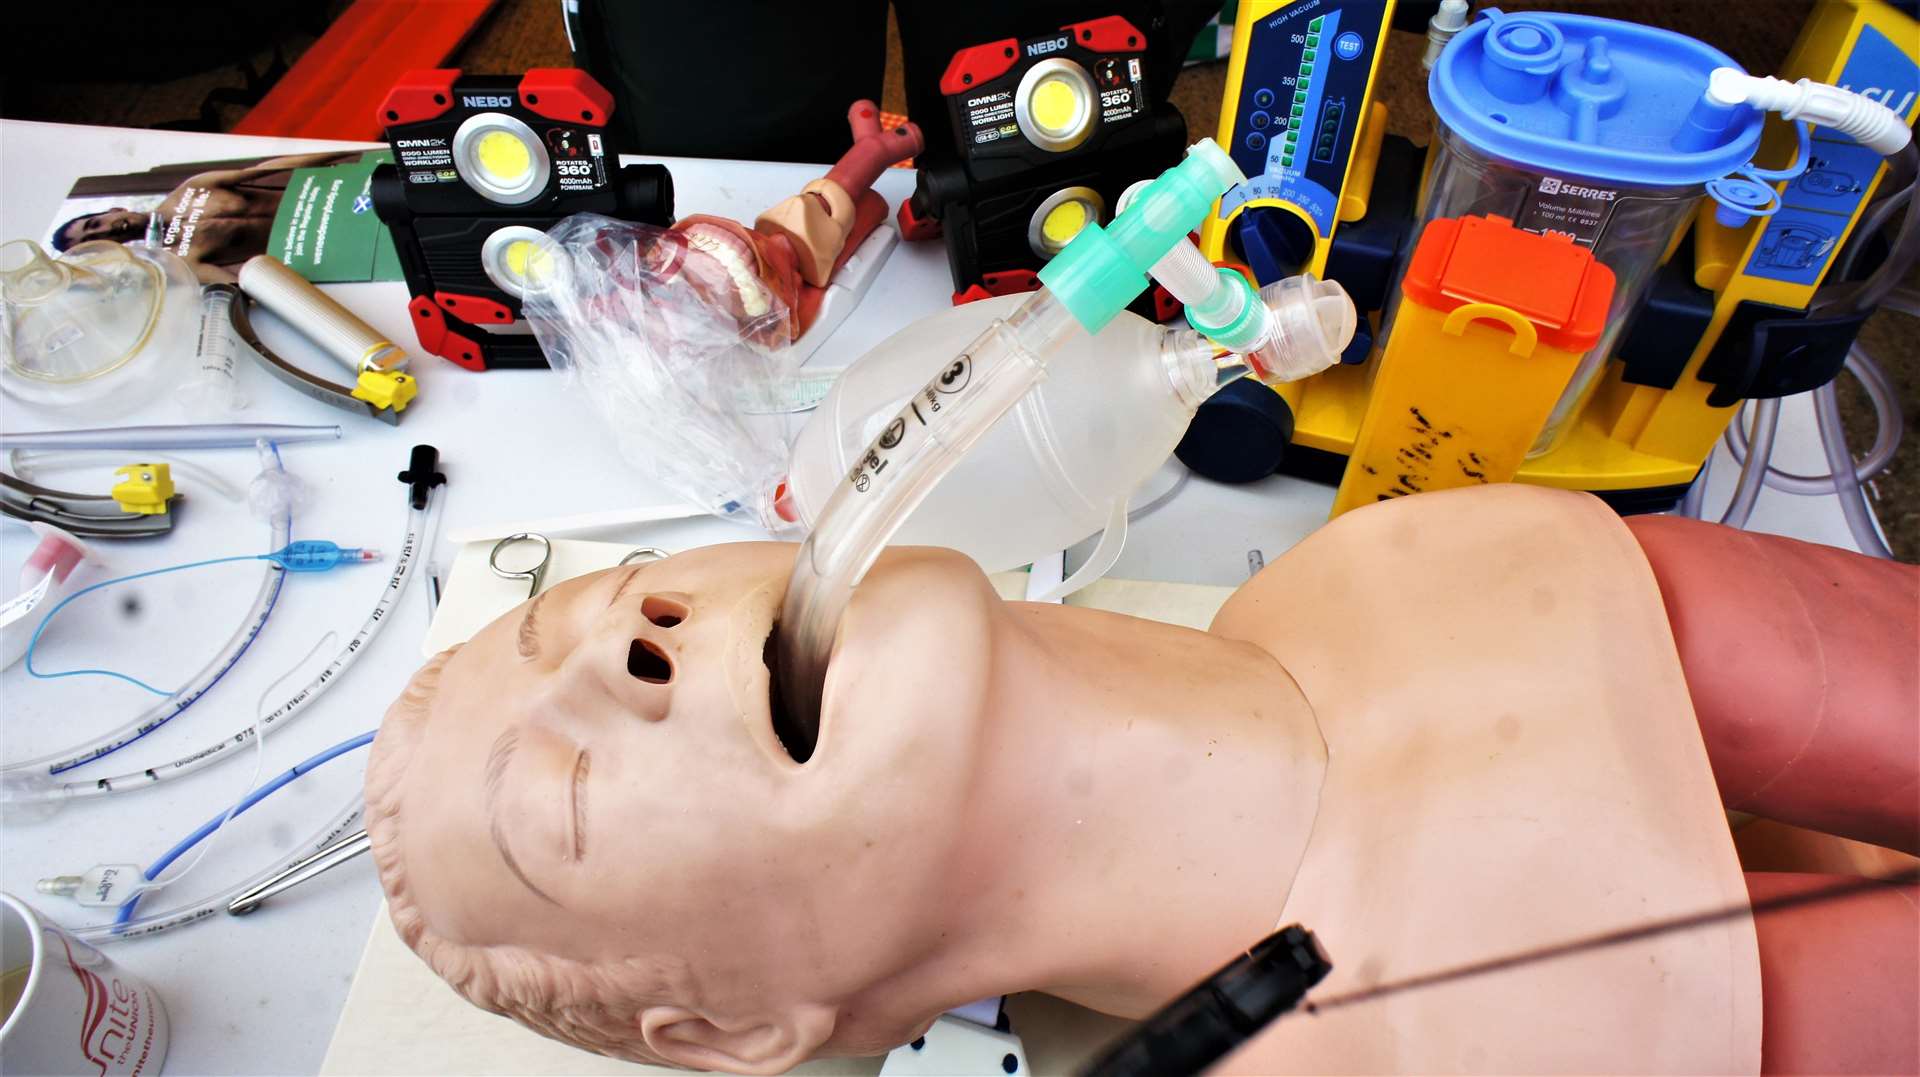 The ambulance crew showed resuscitation techniques using this dummy. Picture: DGS